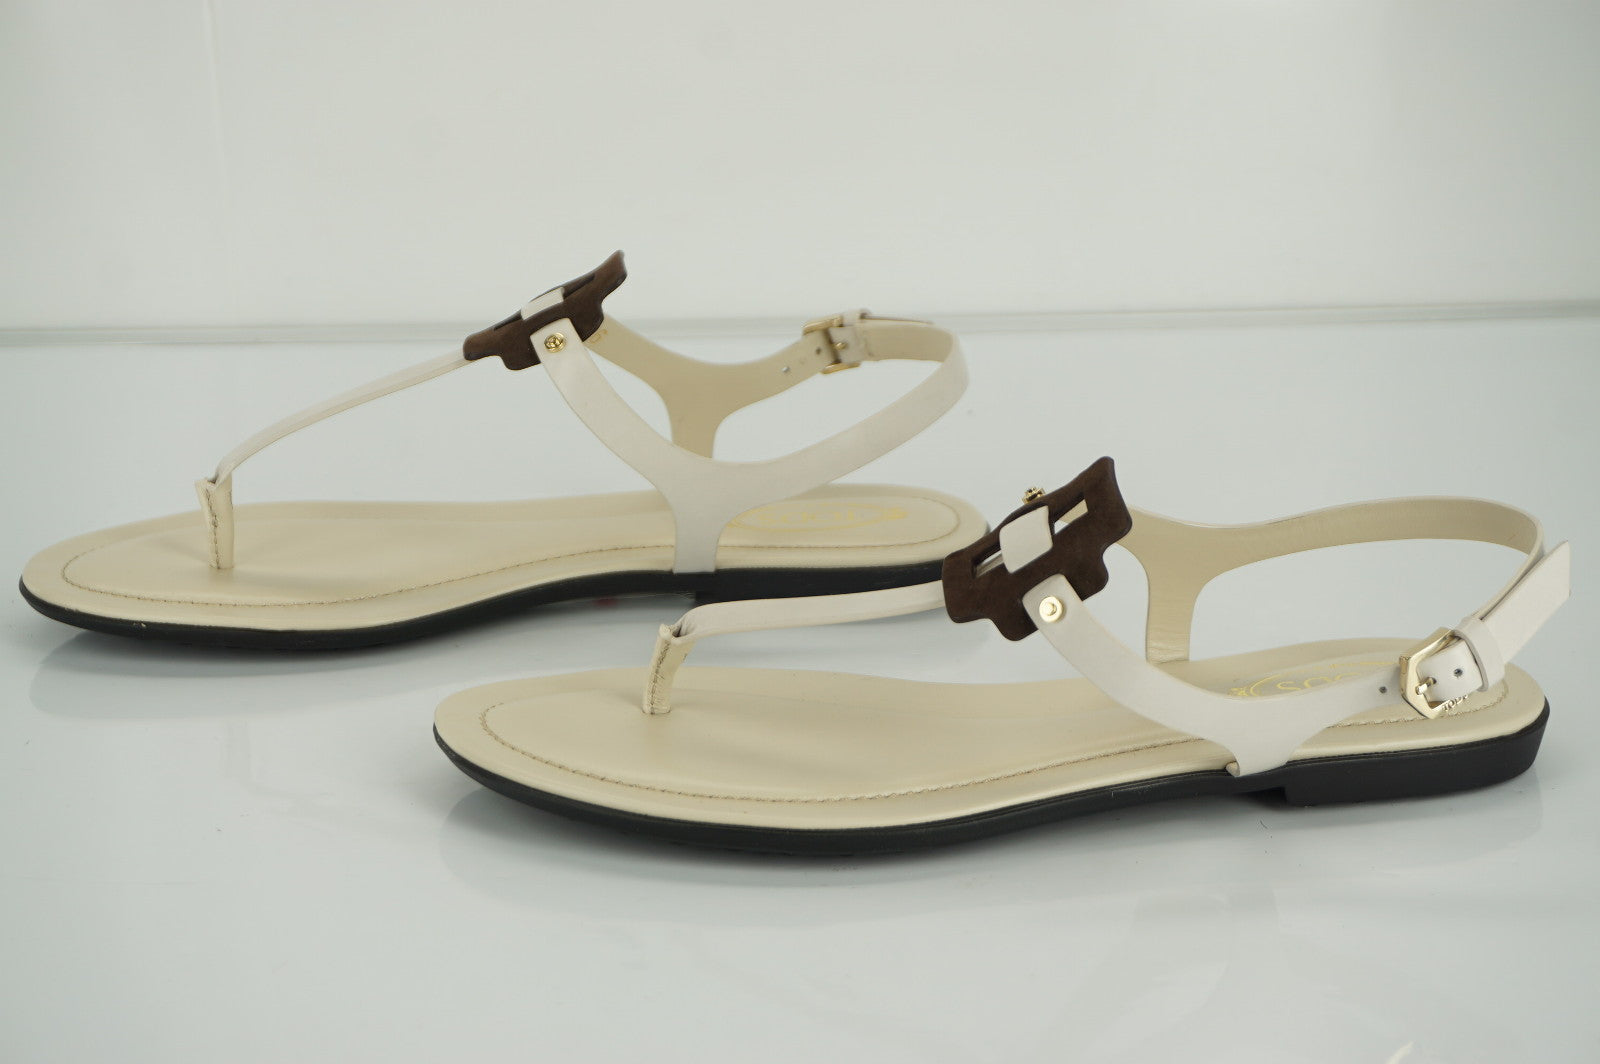 Tods Gomma T Strap Leather Thong Sandals size 36 Ankle Strap NIB $465